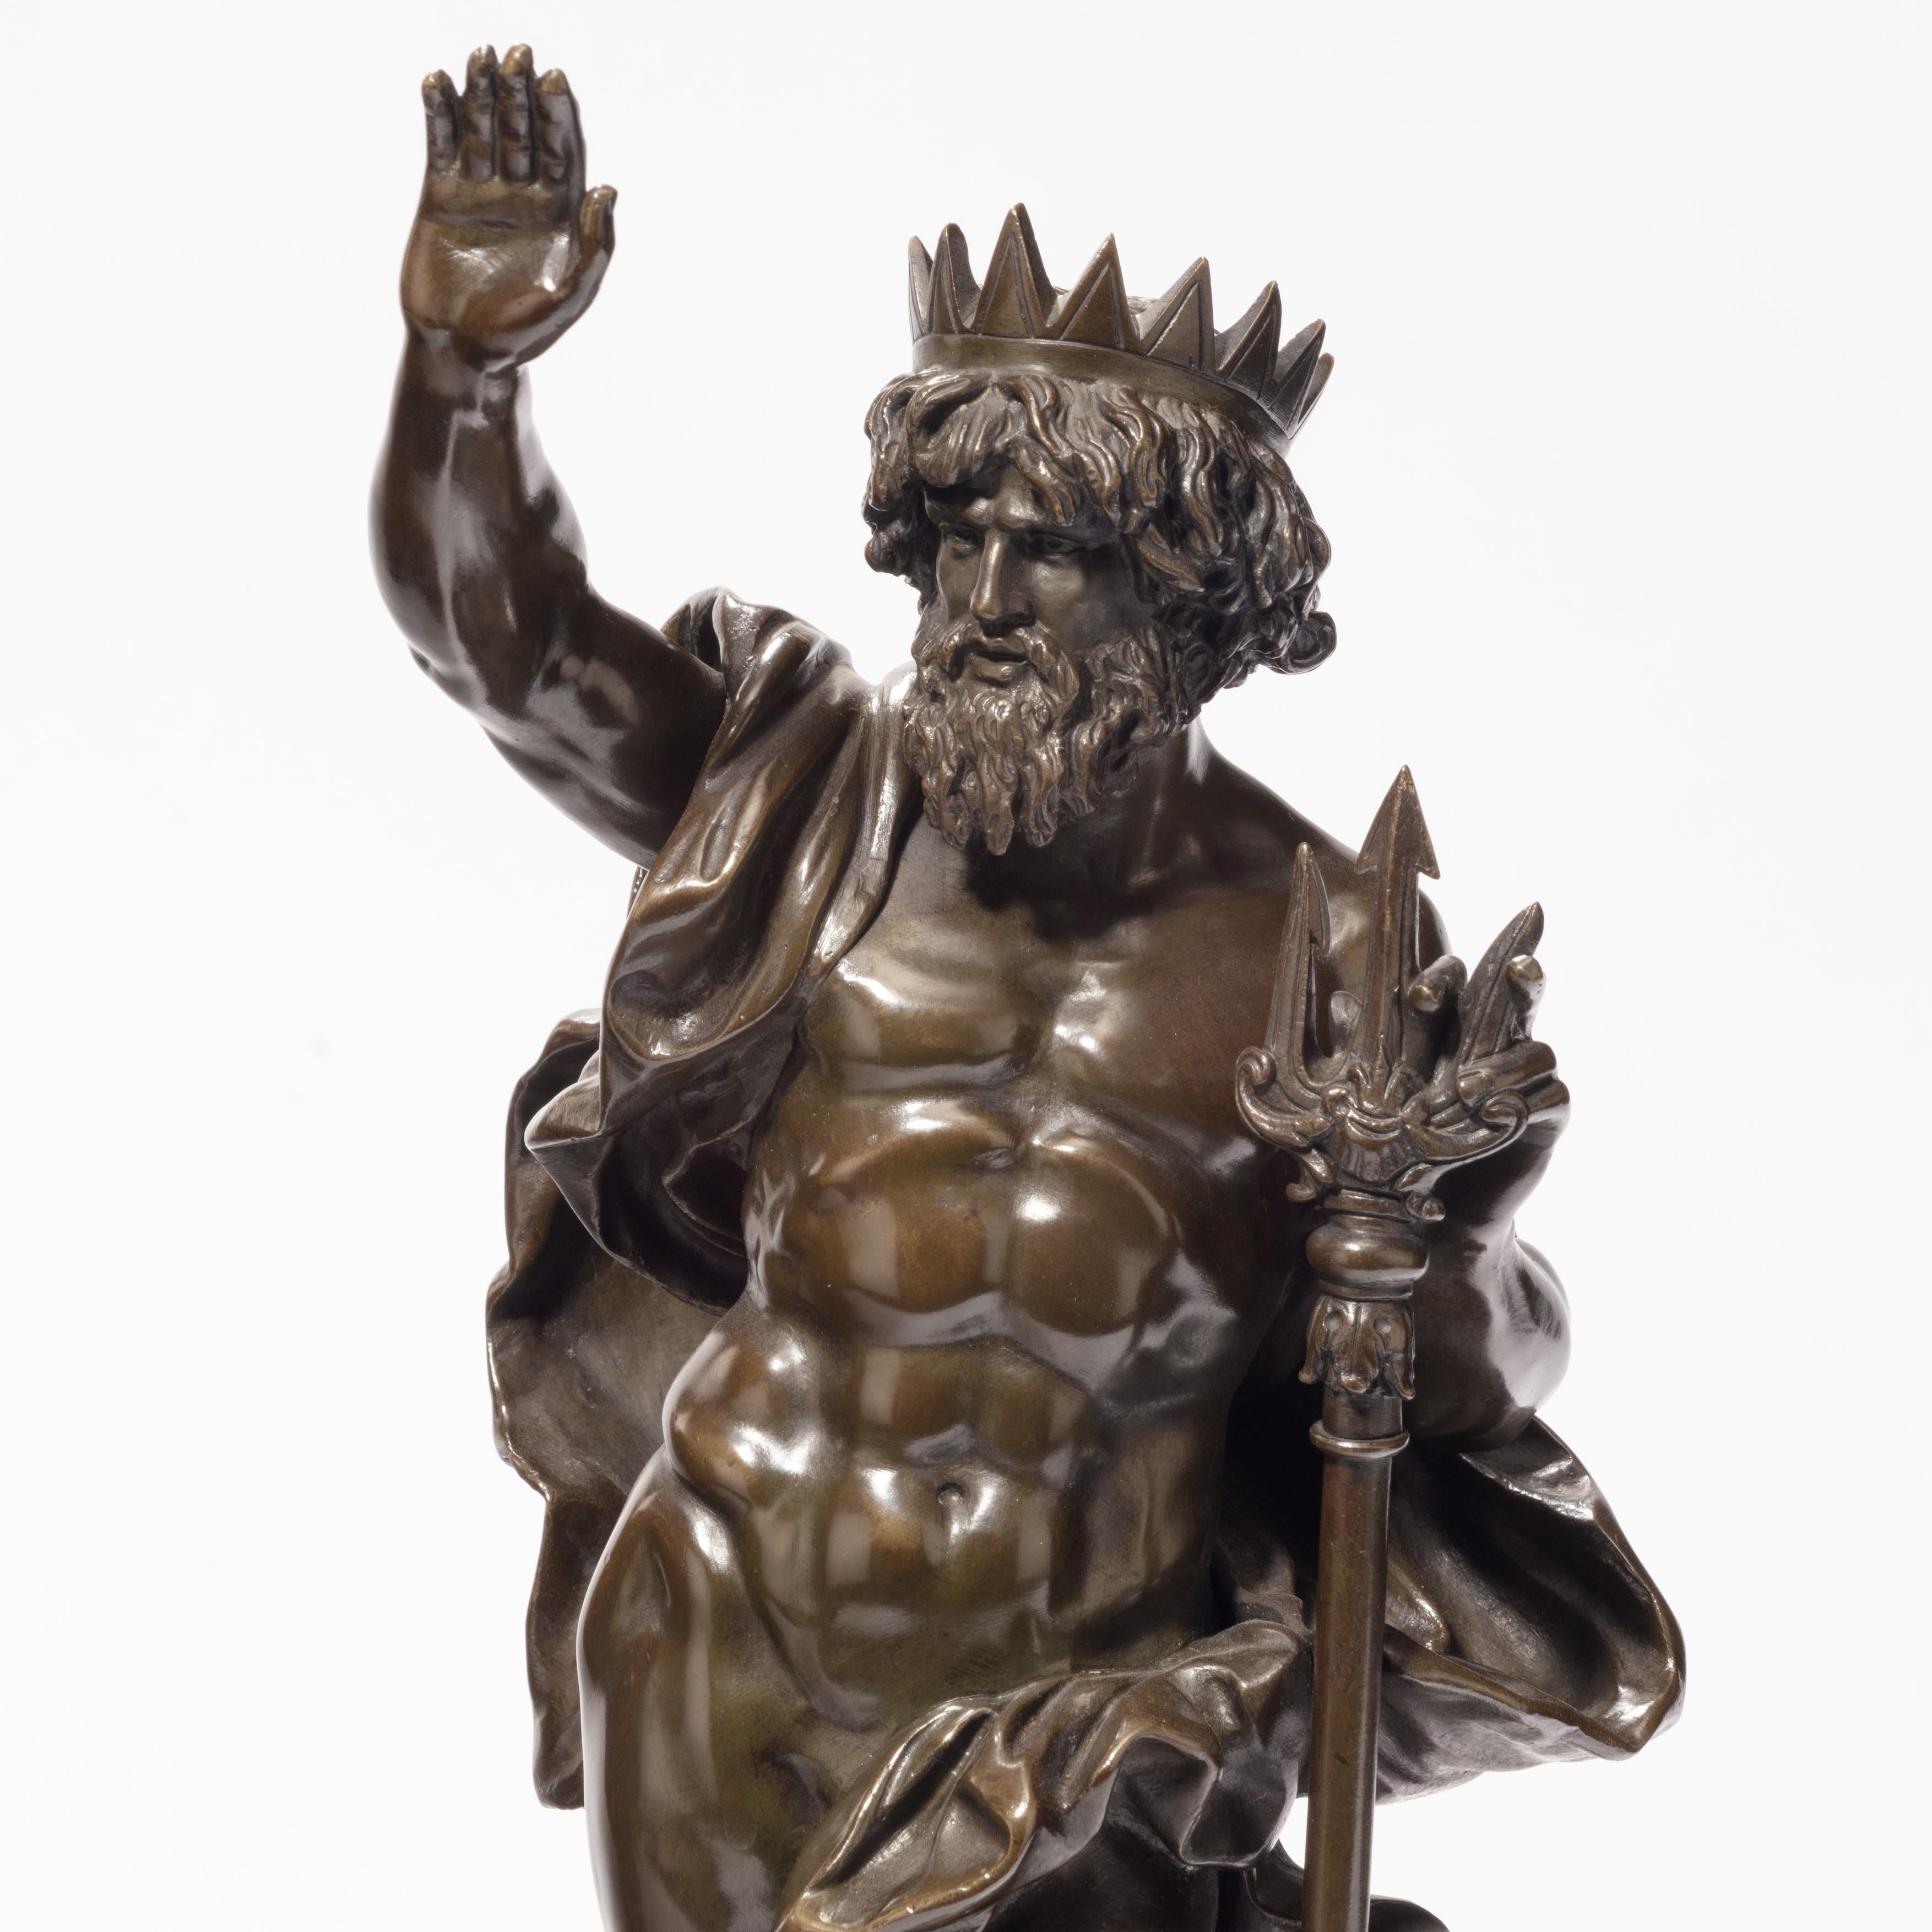 A pair of bronzes depicting Poseidon (Neptune) and Amphitrite by the Moreau Atelier, Neptune shown with his right arm raised to quell the oceans, holding a trident and with a hippocampus at his feet, Amphitrite upending a shell encrusted amphora and